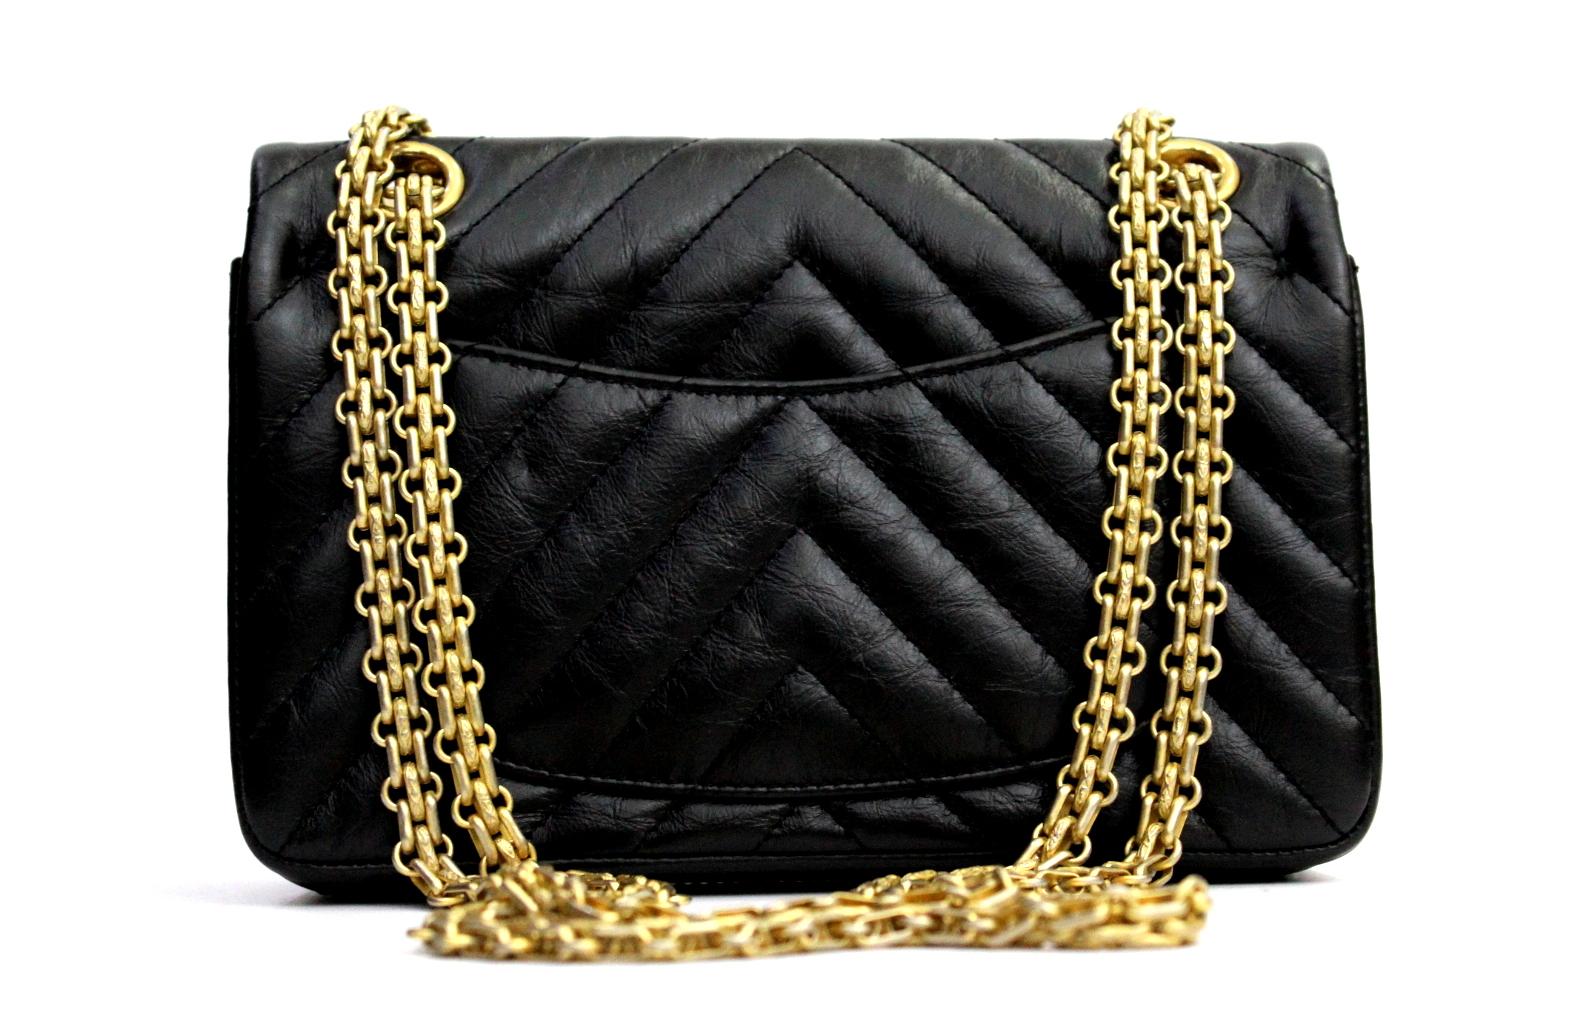 Women's Chanel Black Leather Classic 2.55 Small Size Bag